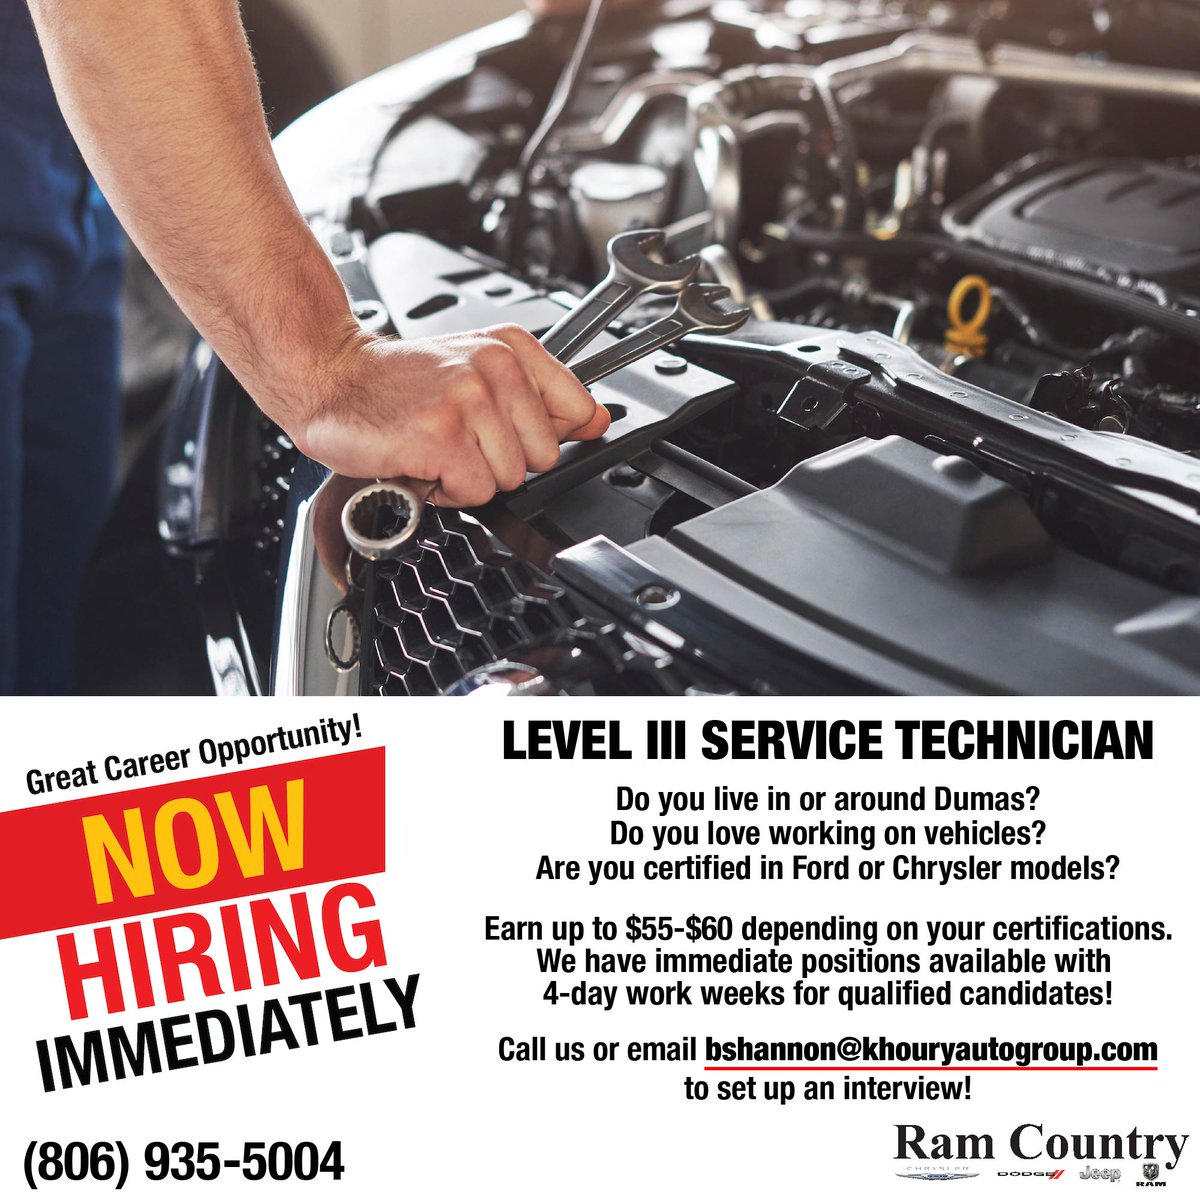 WE ARE HIRING Level III Service Technicians! 🔧 If you love working on vehicles and live in or around the Dumas area, call us or email bshannon@khouryautogroup.com to set up an interview! You can earn up to $55-$60 depending on your qualifications and certifications!